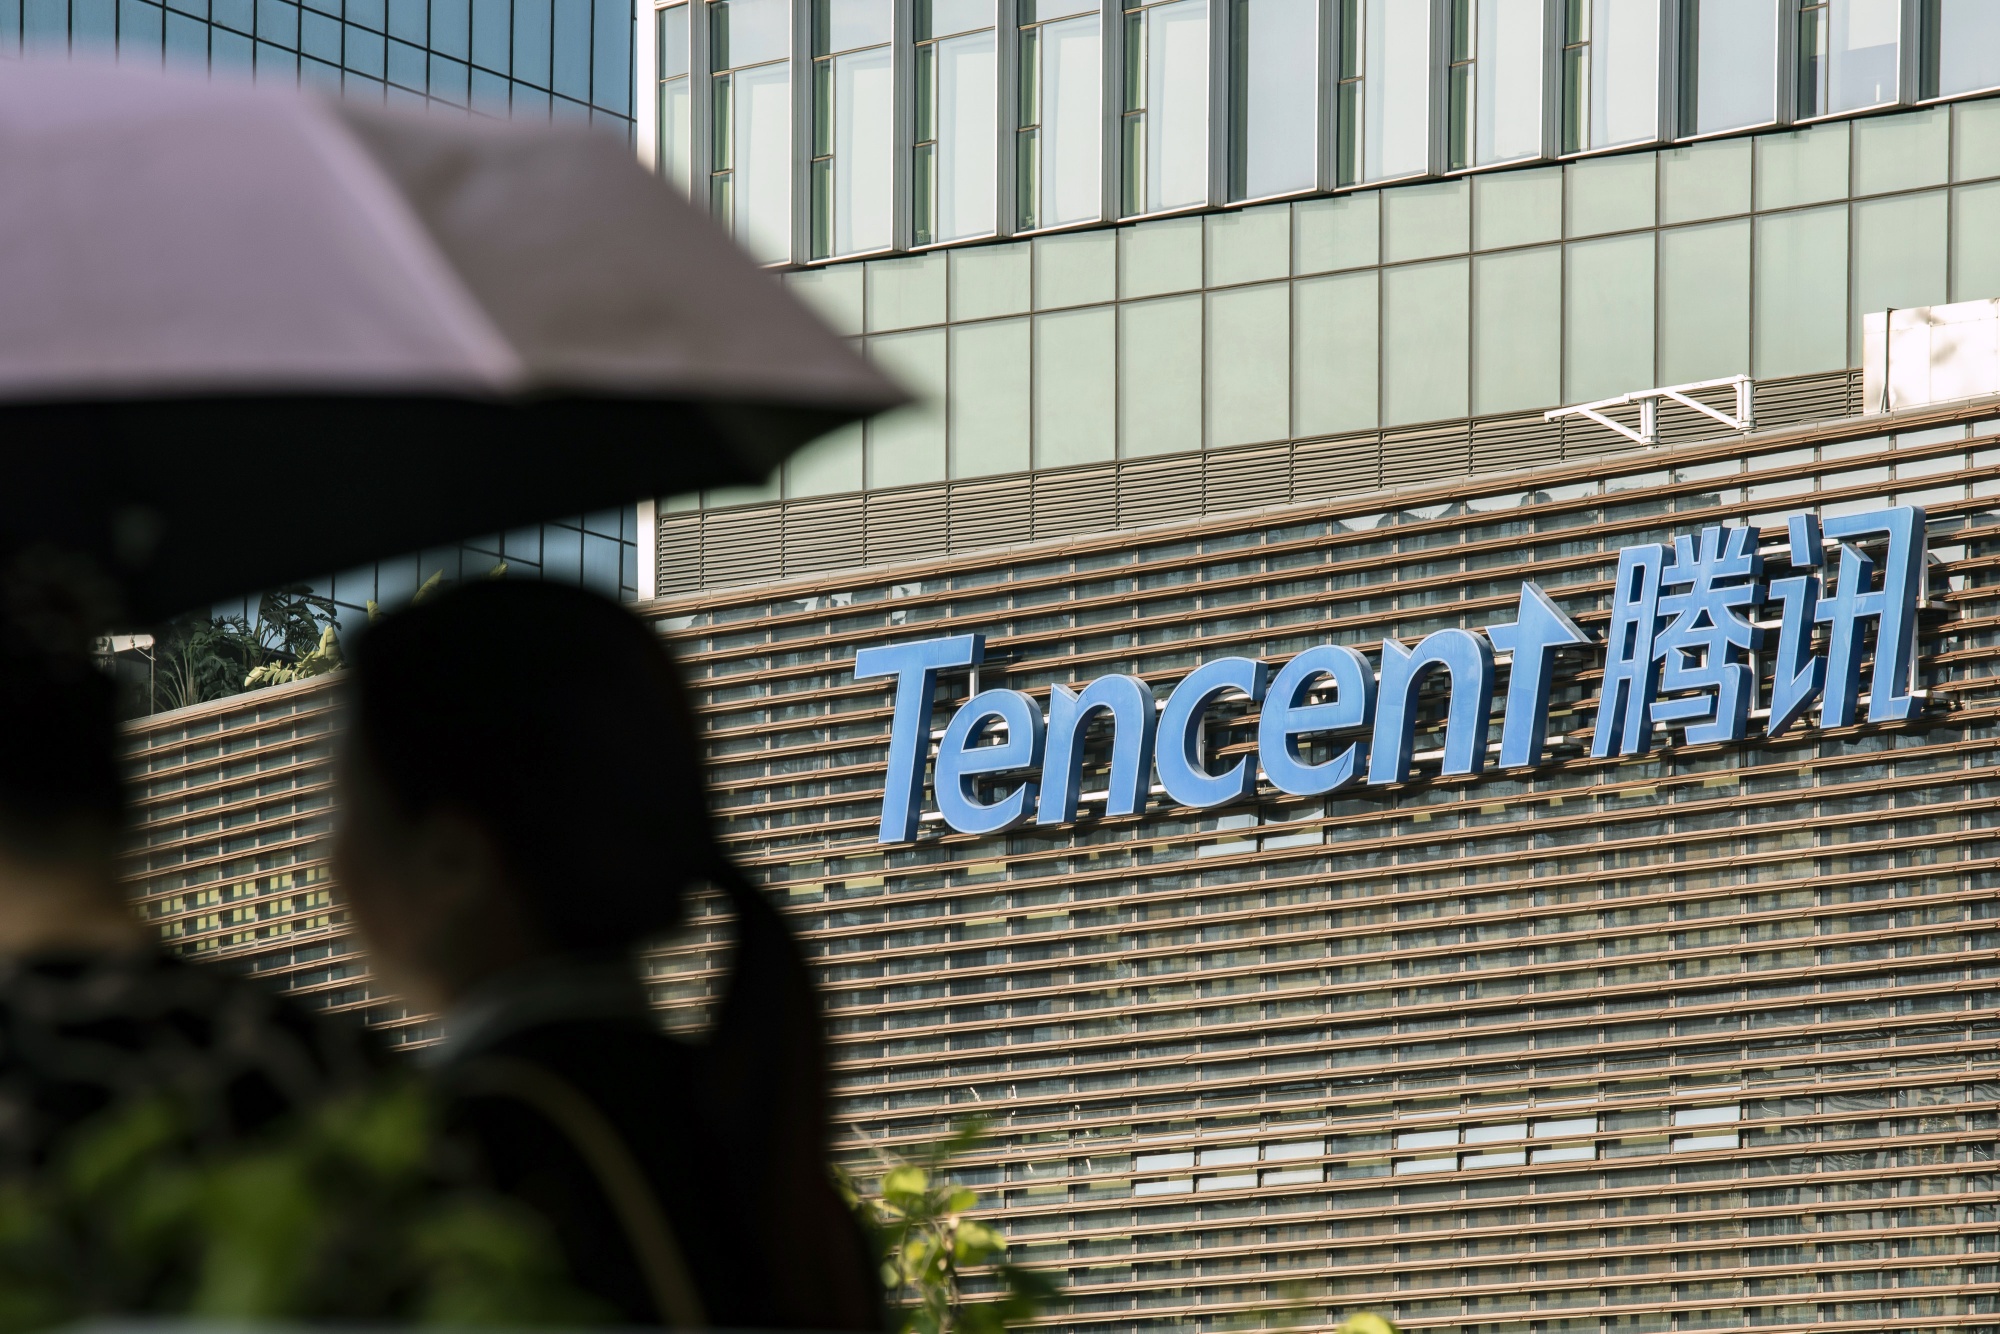 Tencent's most successful mobile game: the past, present and